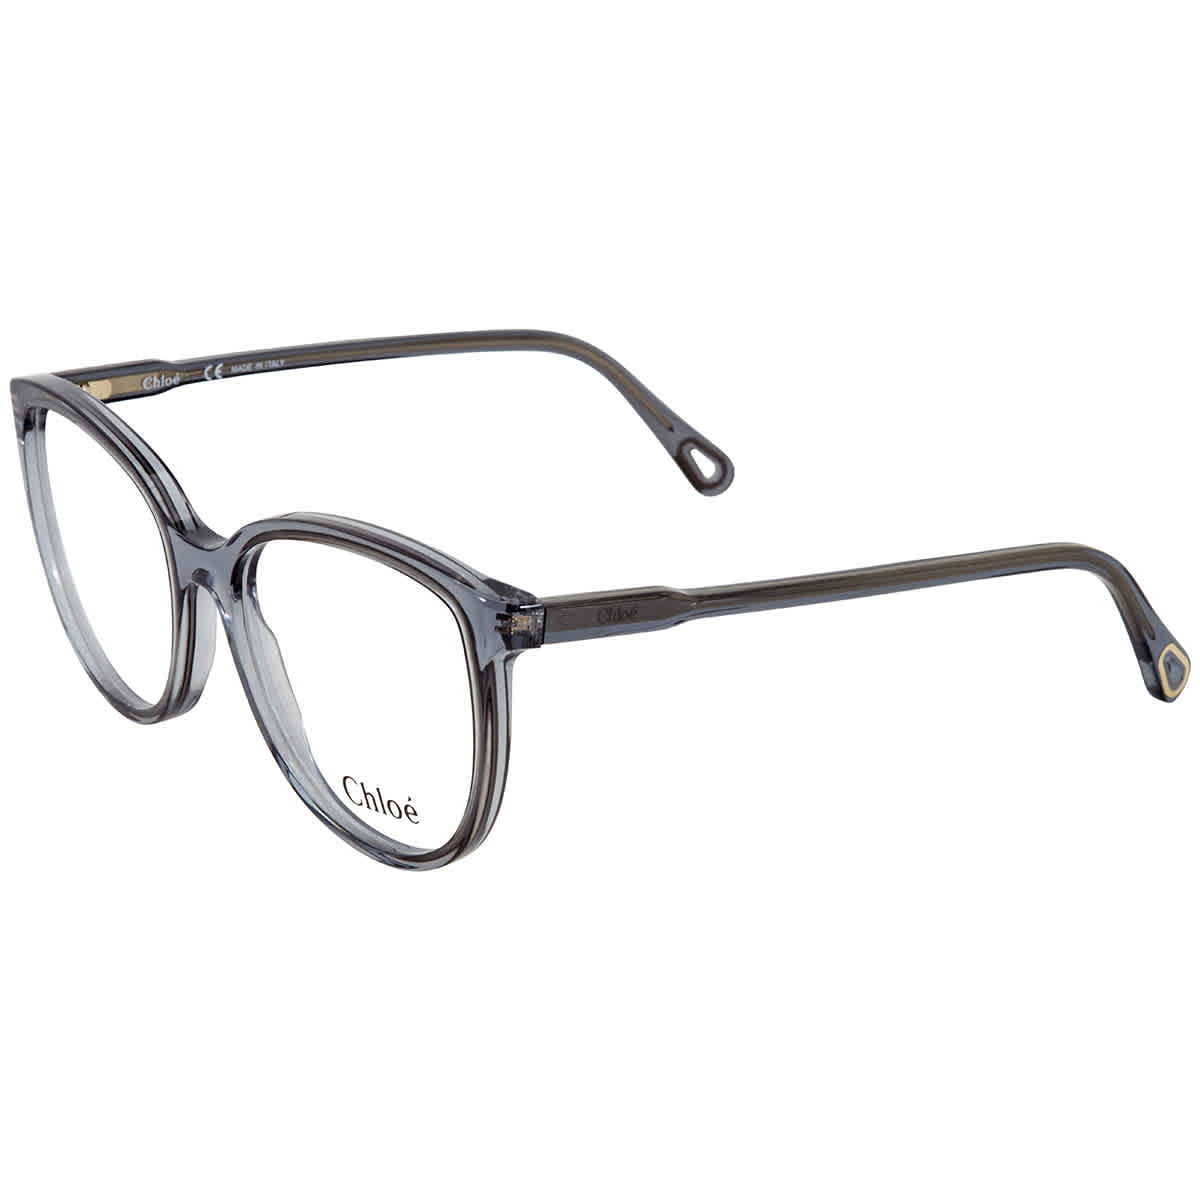 without Glasses frames Square Glasses Frames Women Trending Styles Brand Optical Computer eye galses female clear lens Spectacle Frame Color : Black